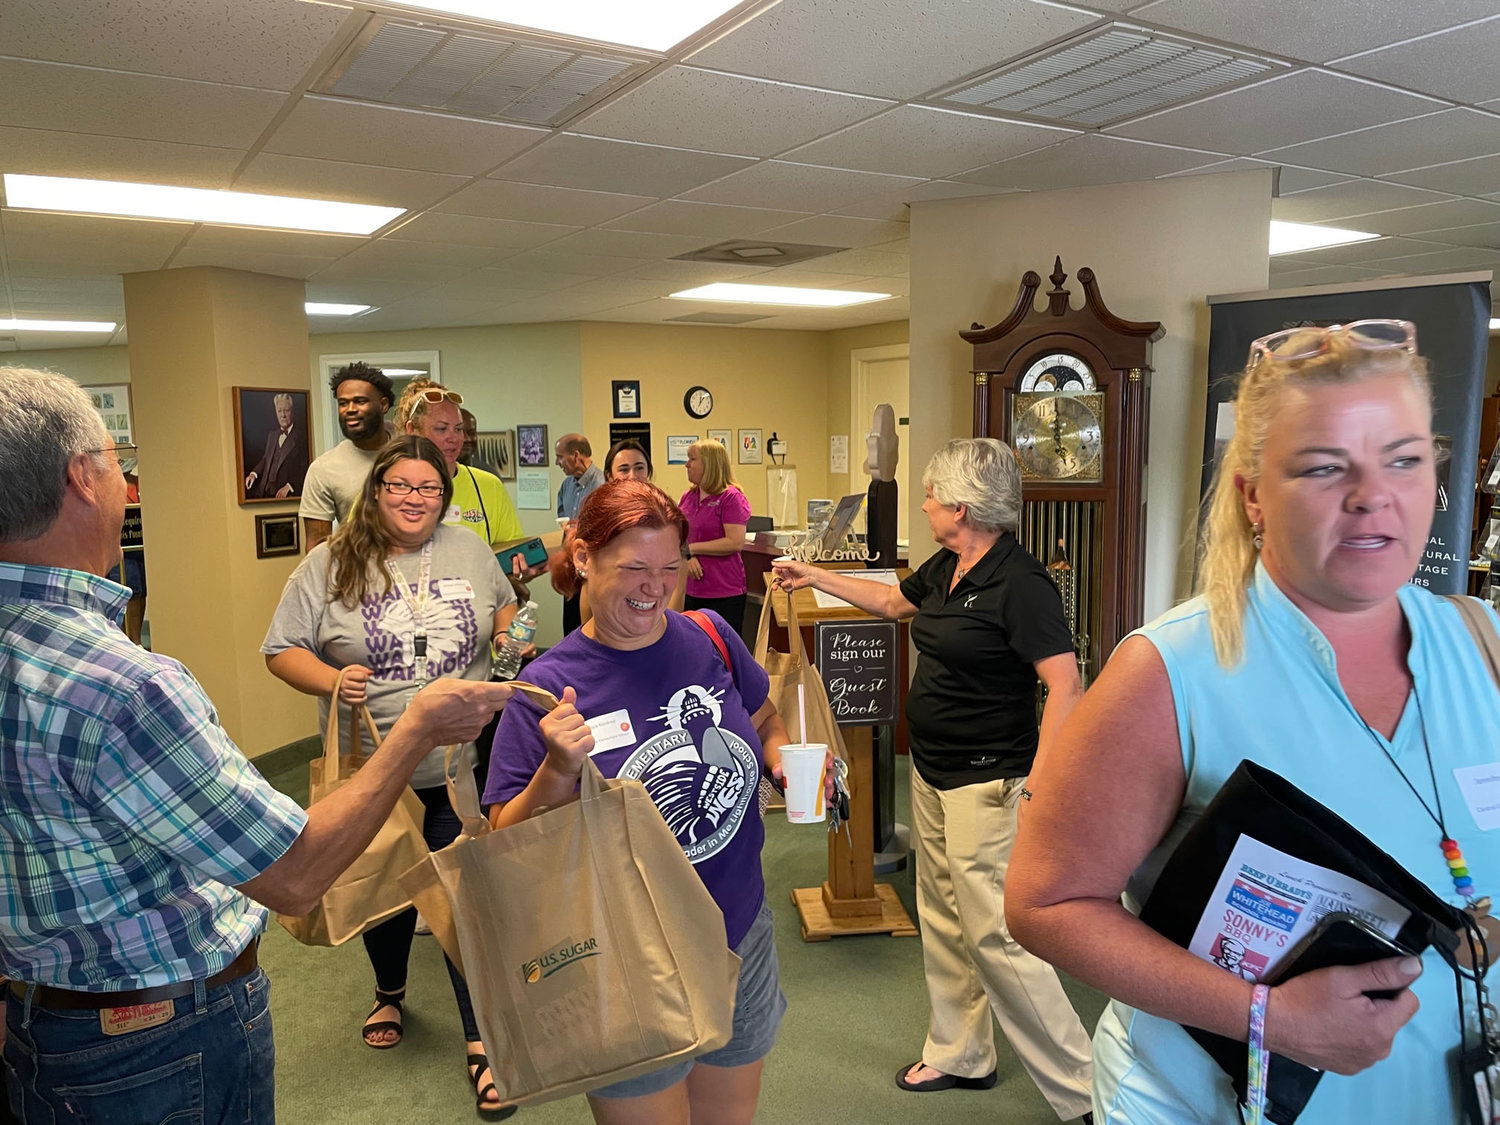 The 130 teachers received a bag of school supplies donated by area businesses.